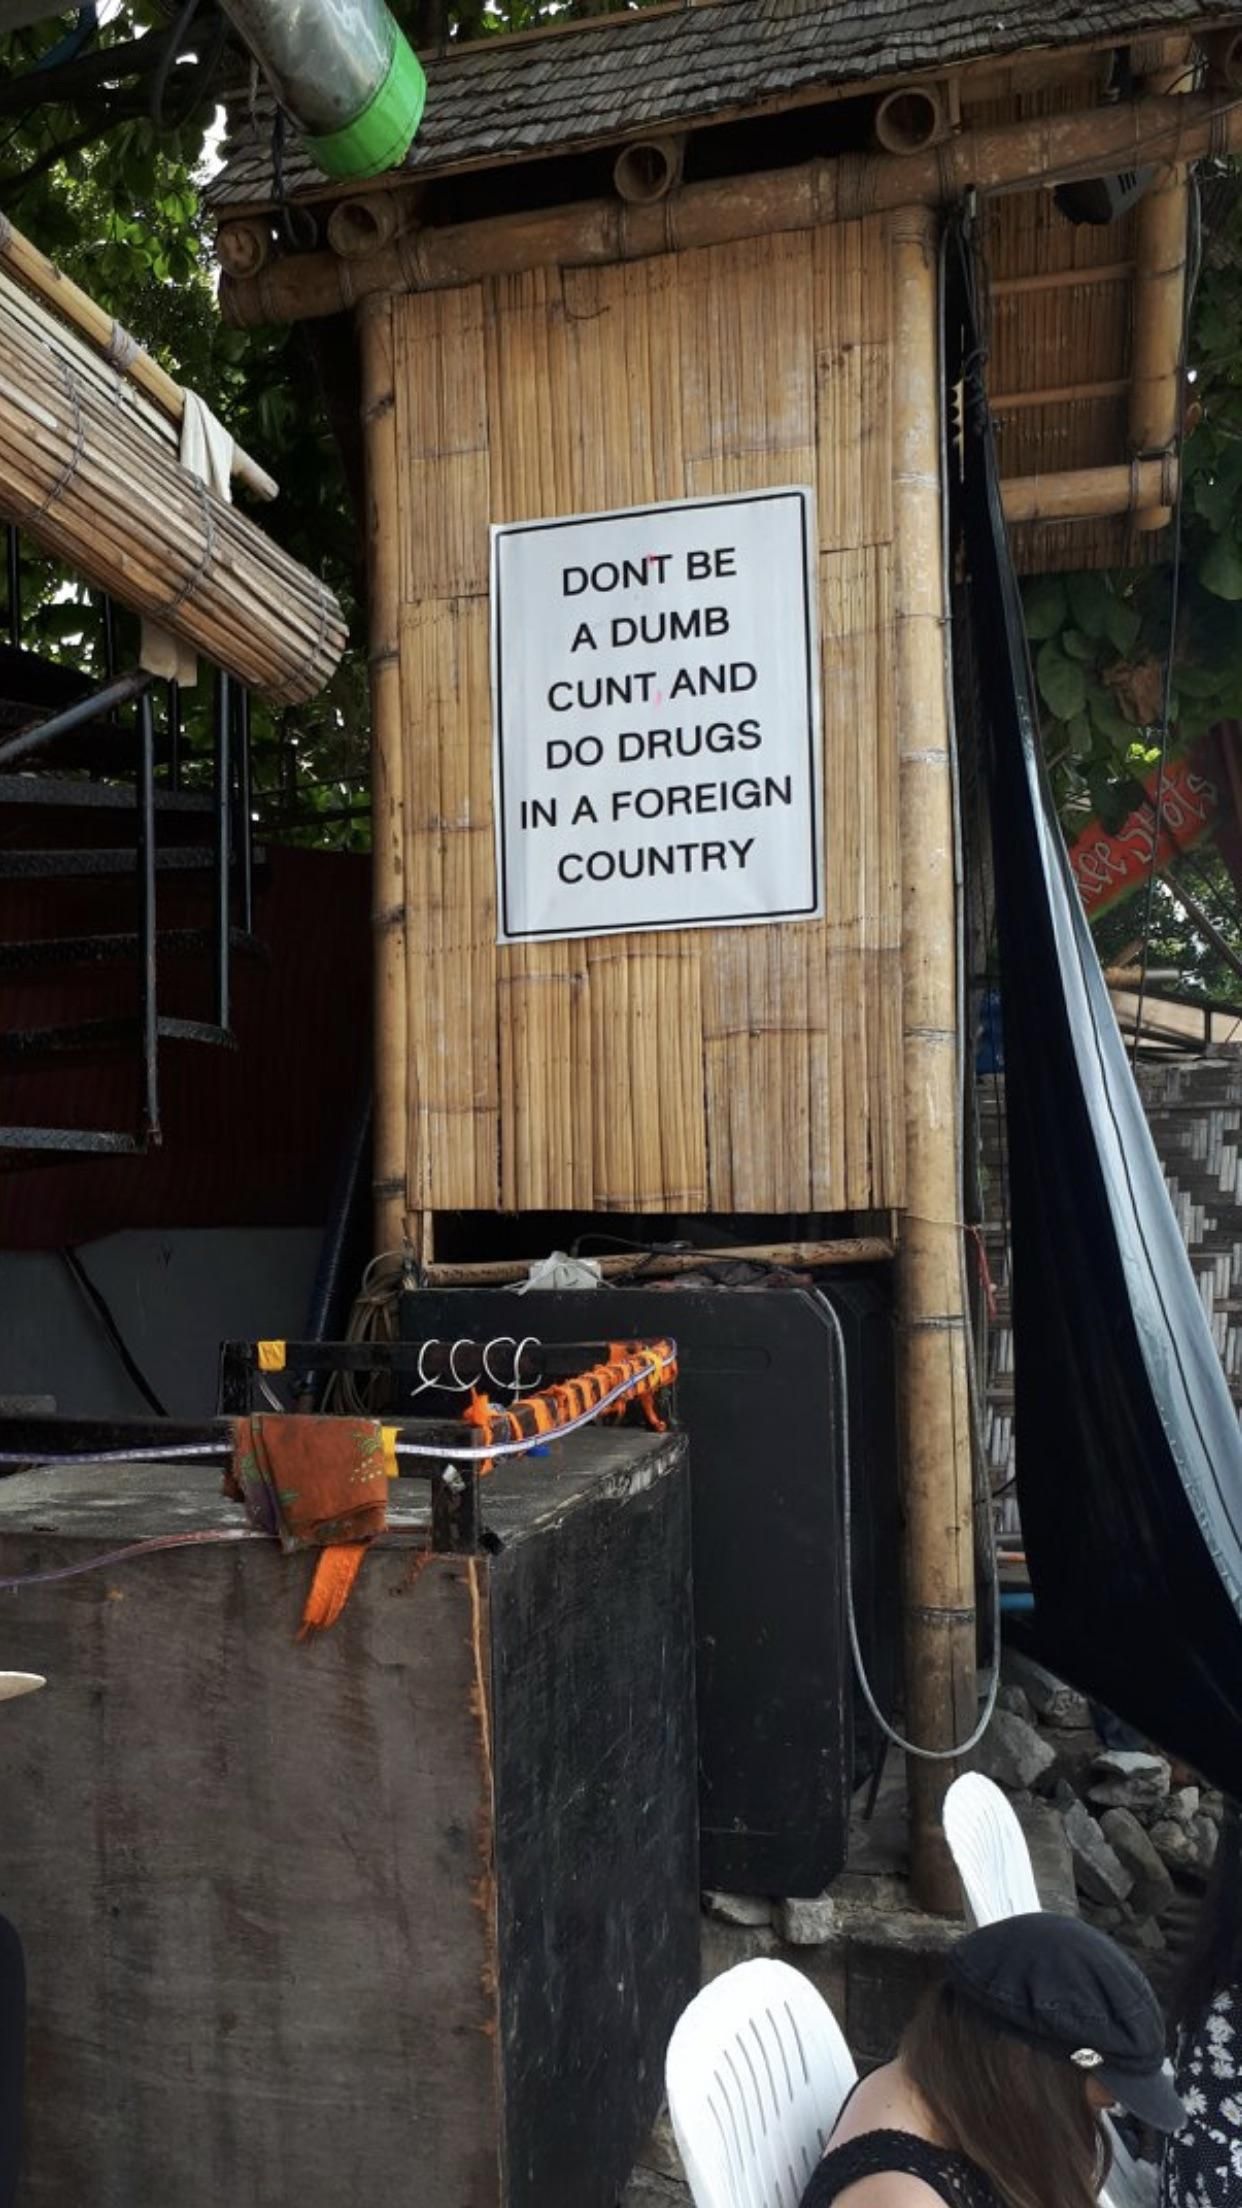 This sign in Phuket